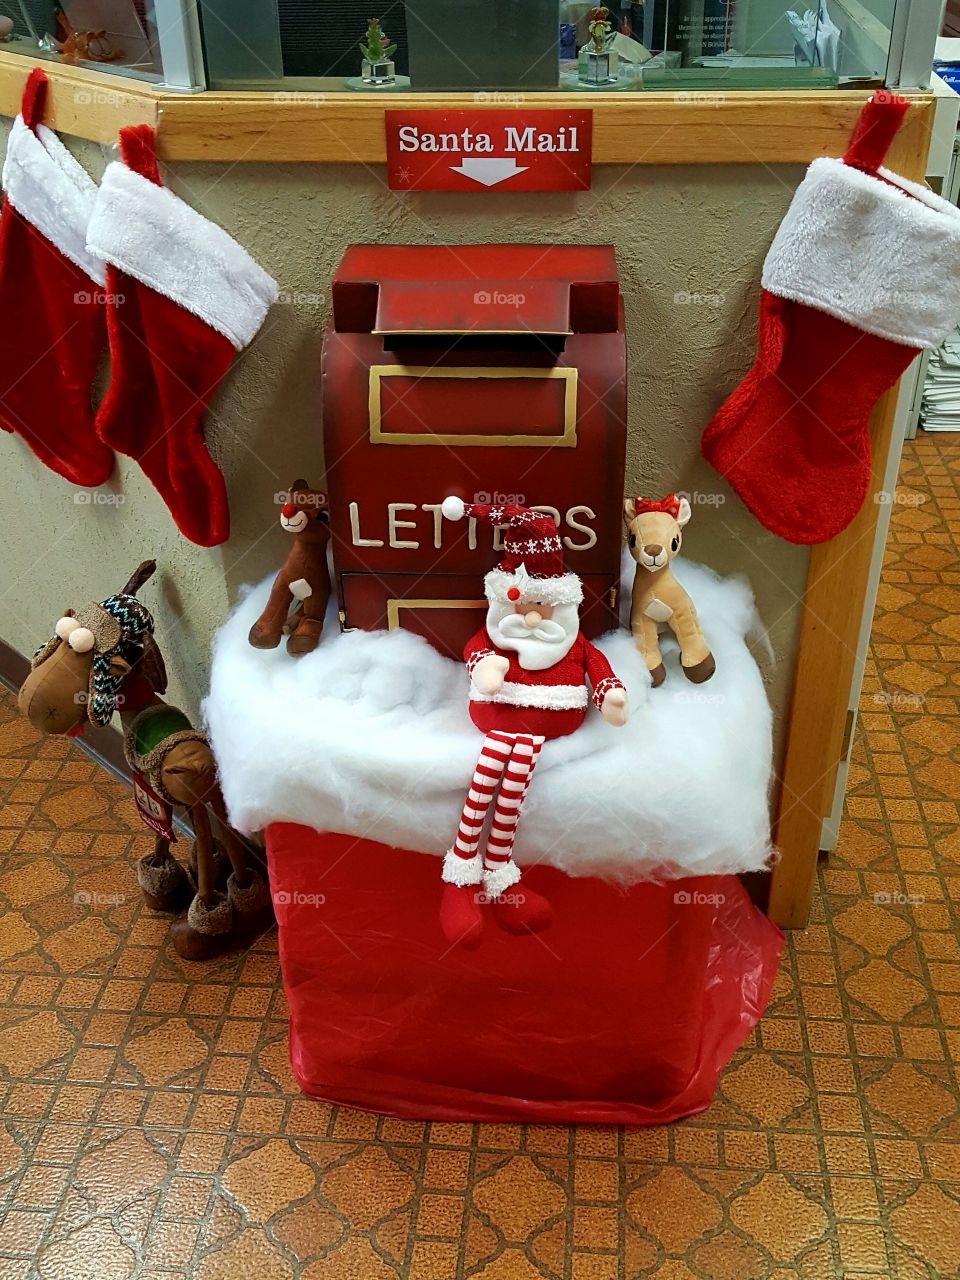 I found this little gem in a small town City Hall in rural Kansas. The folks there had just set it up for the first time this year as a way for the community children to post letters to Santa Claus.